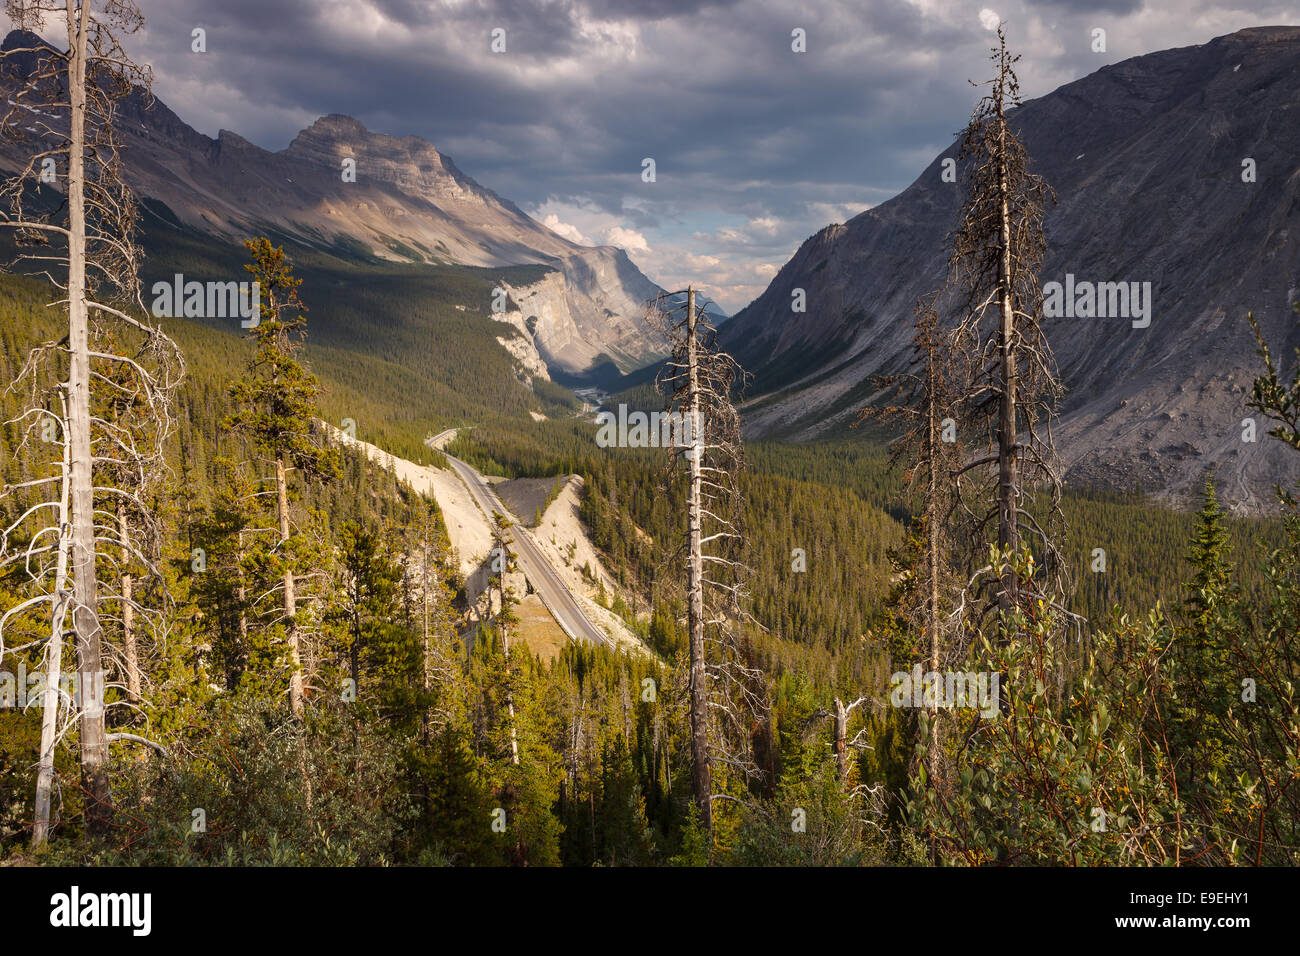 View of the Icefields Parkway as it crosses Banff National Park, Alberta, Canada. Stock Photo